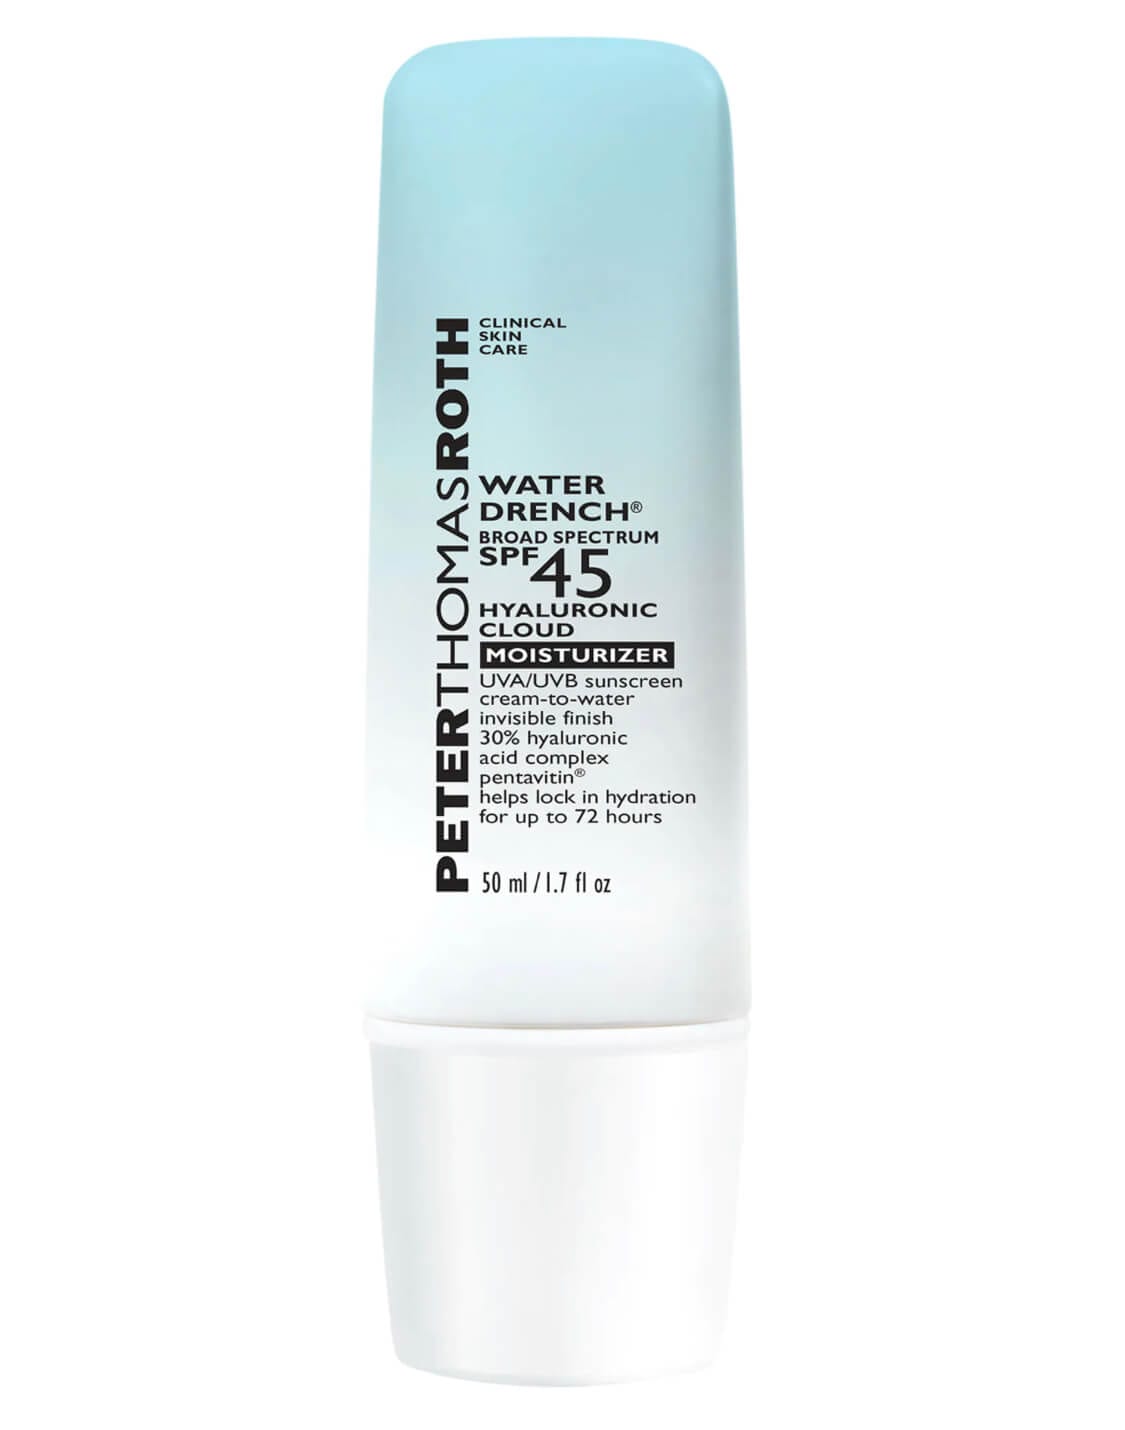 Water Drench® Hyaluronic Hydrating Moisturizer SPF 45 by Peter Thomas Roth